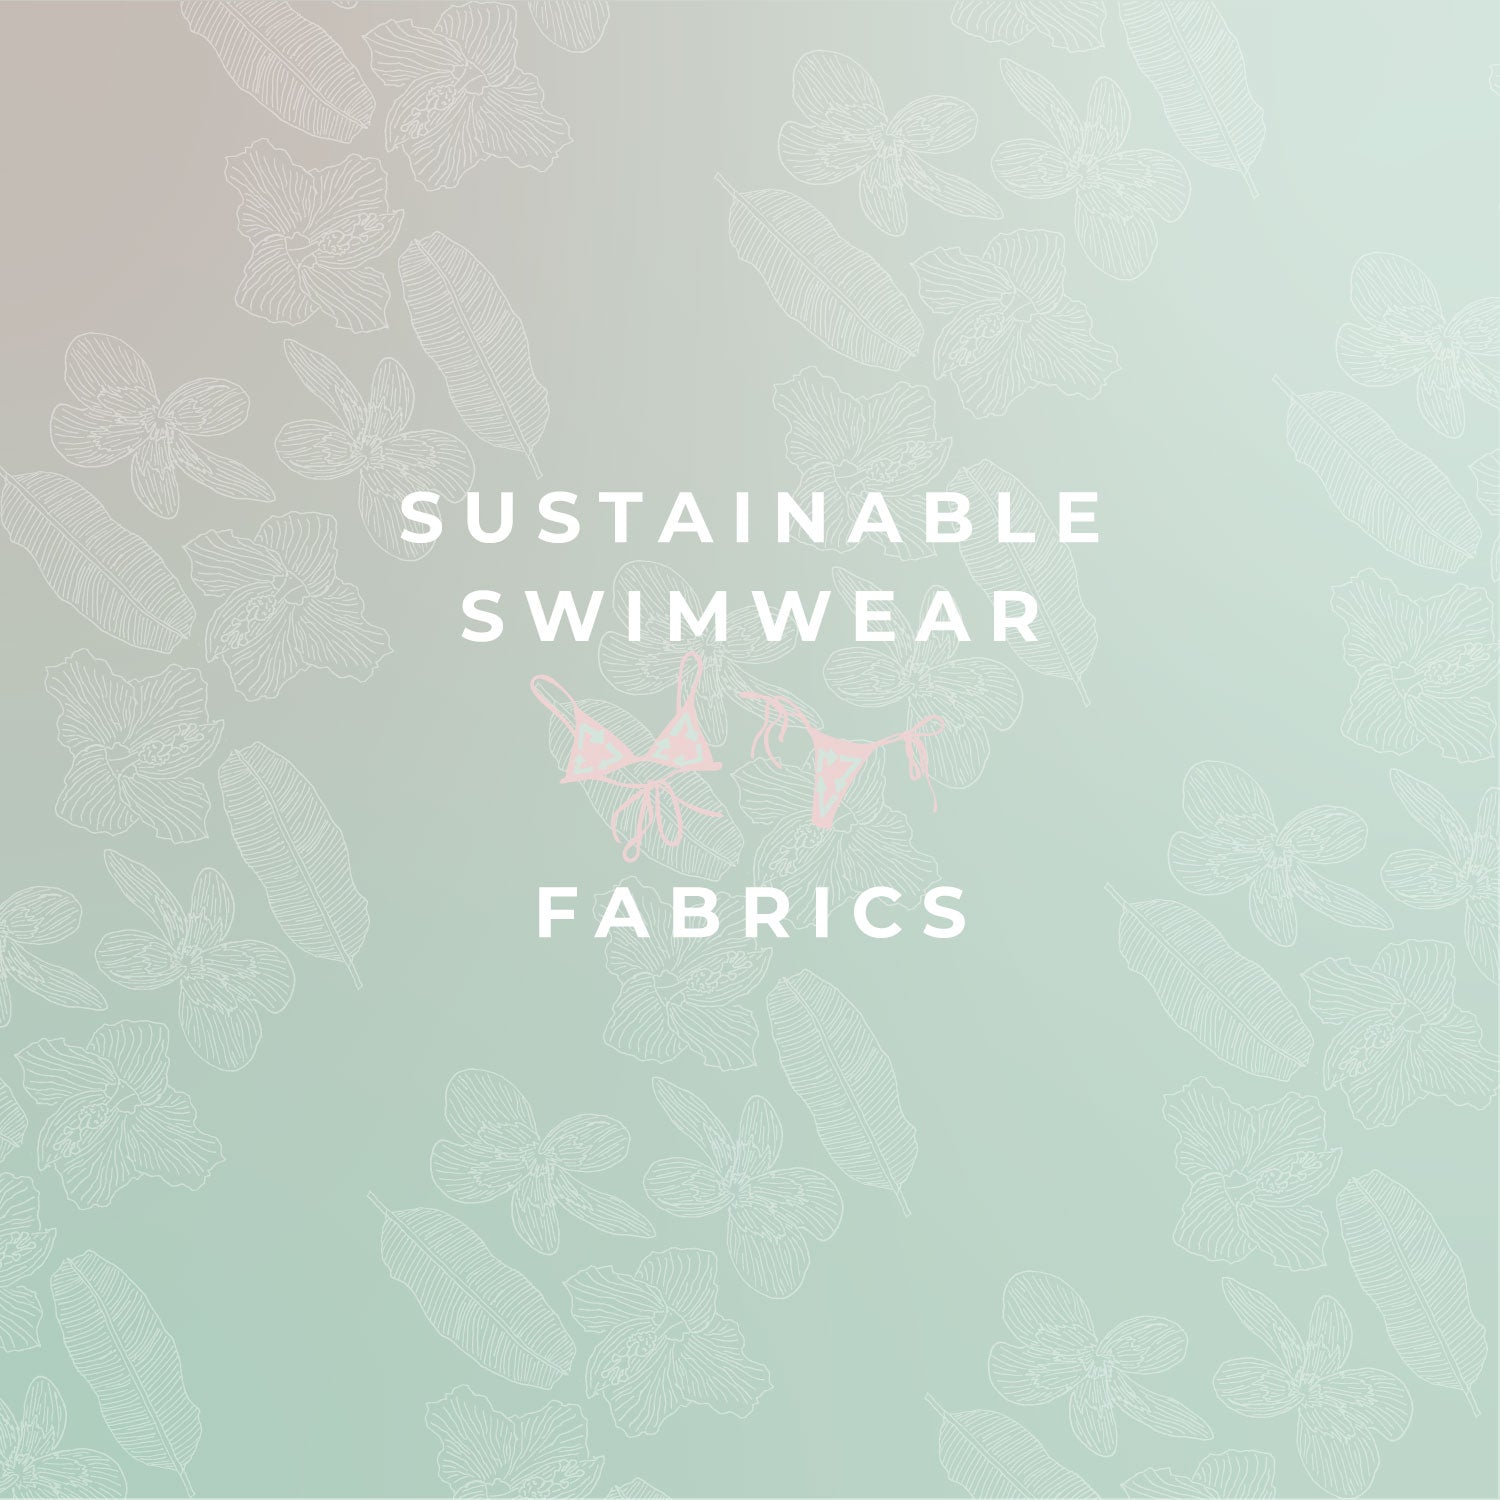 Complete List of all Sustainable Swimwear Fabrics Available